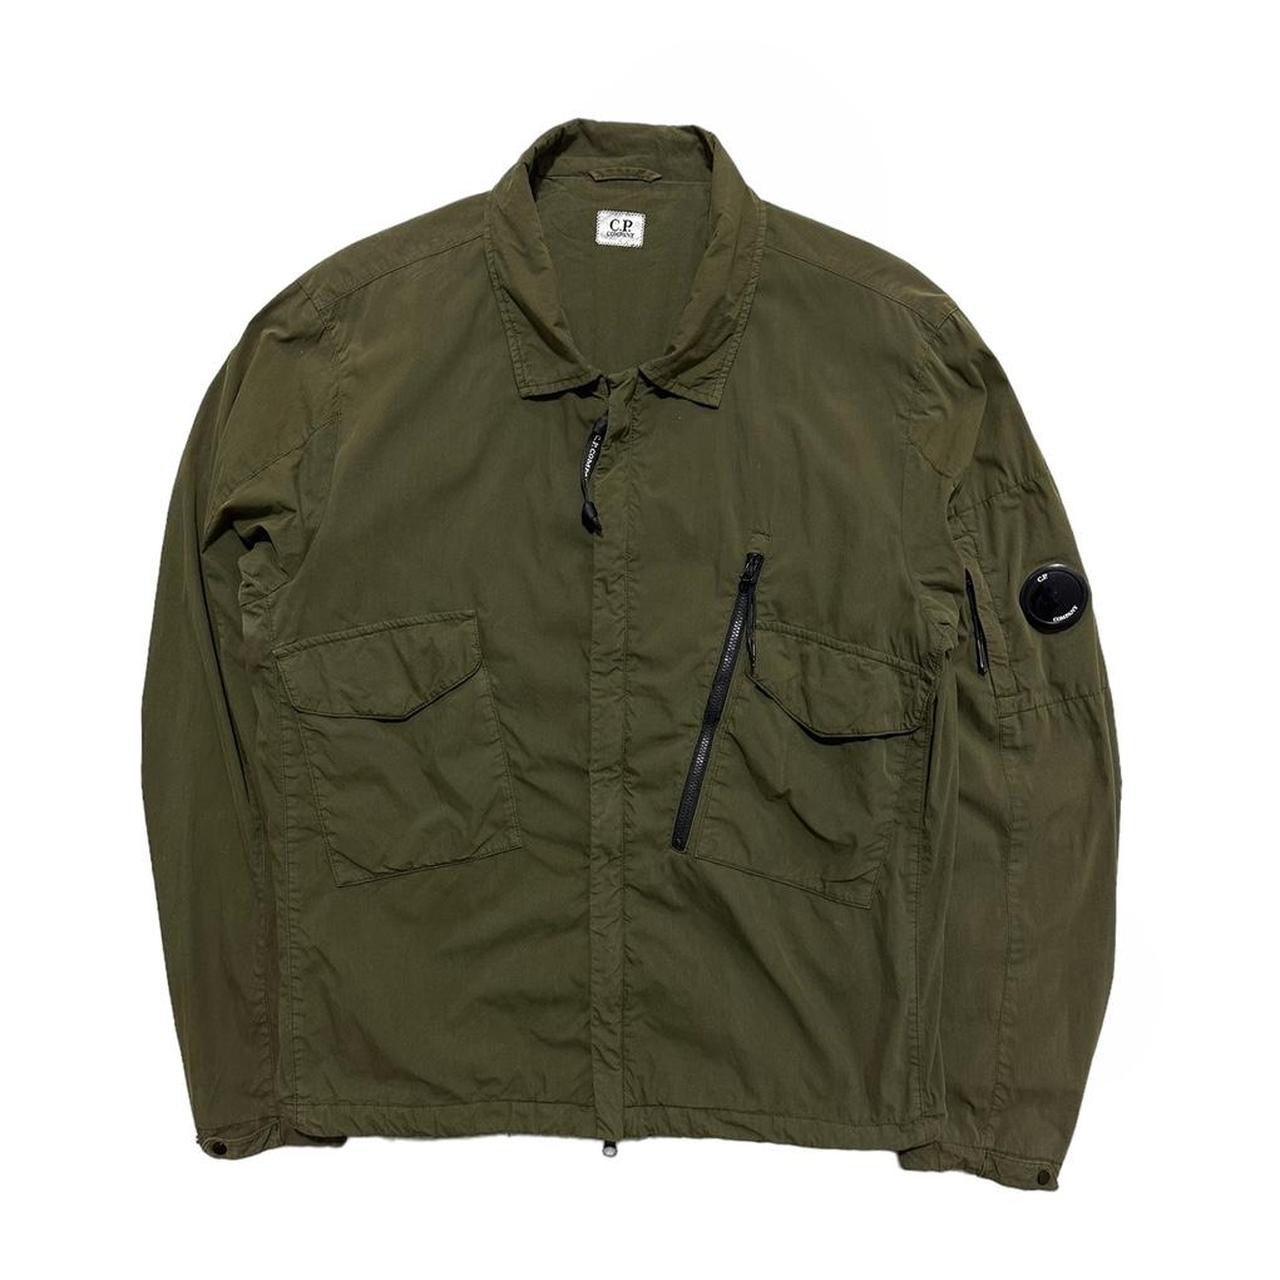 CP Company 50 Fili Cotton Double Pocket Overshirt - Known Source